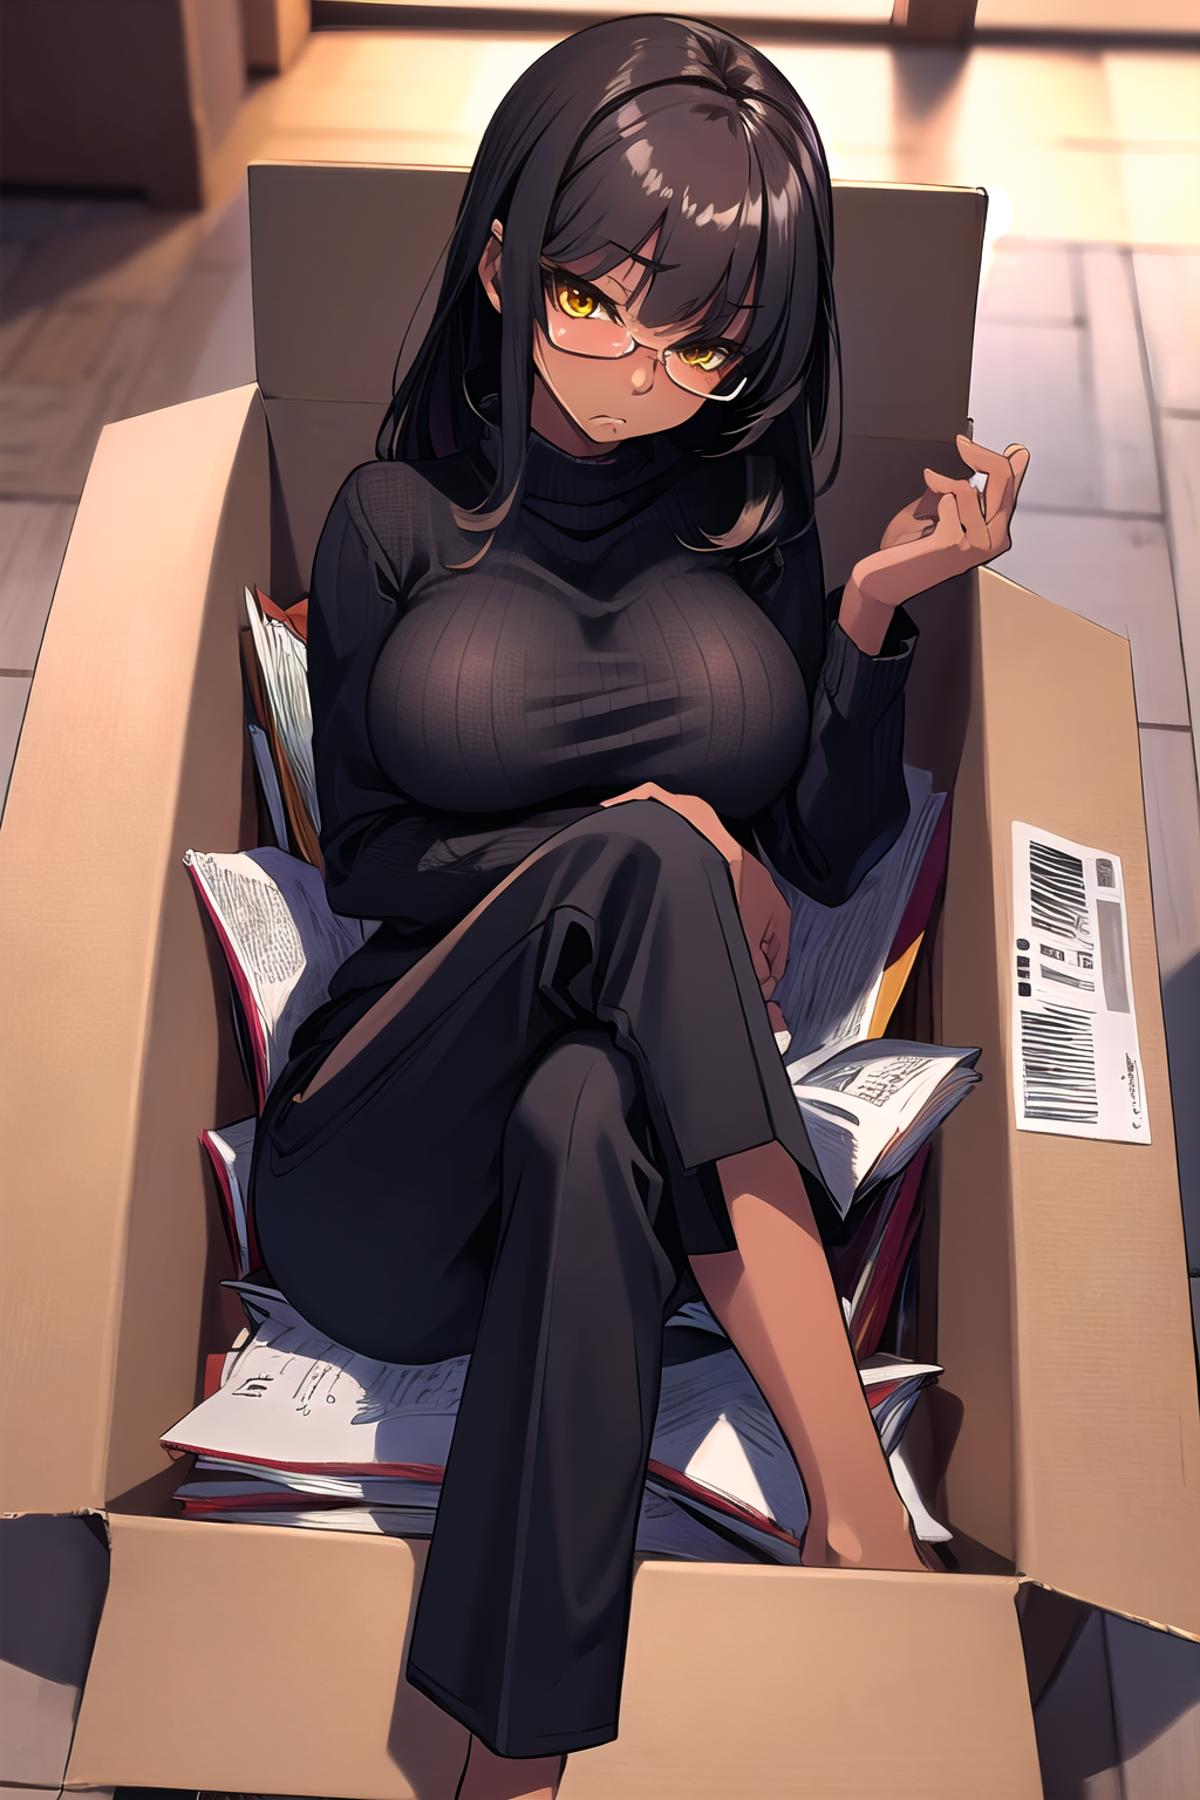 Your shipment has arrived (in box) image by MLGnom